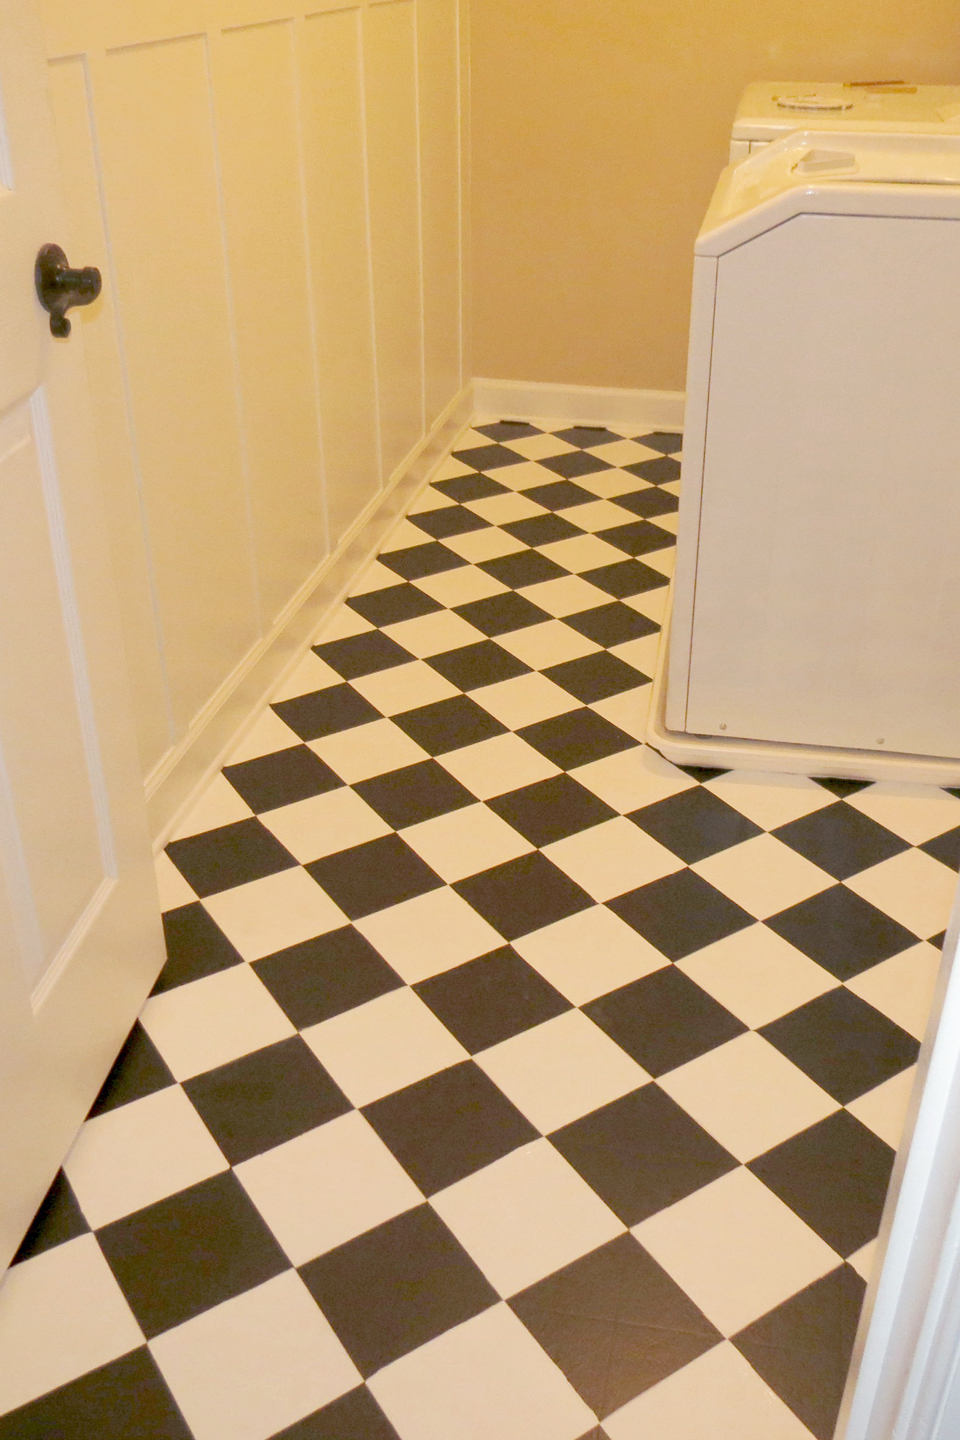 White and black checkerboard floor